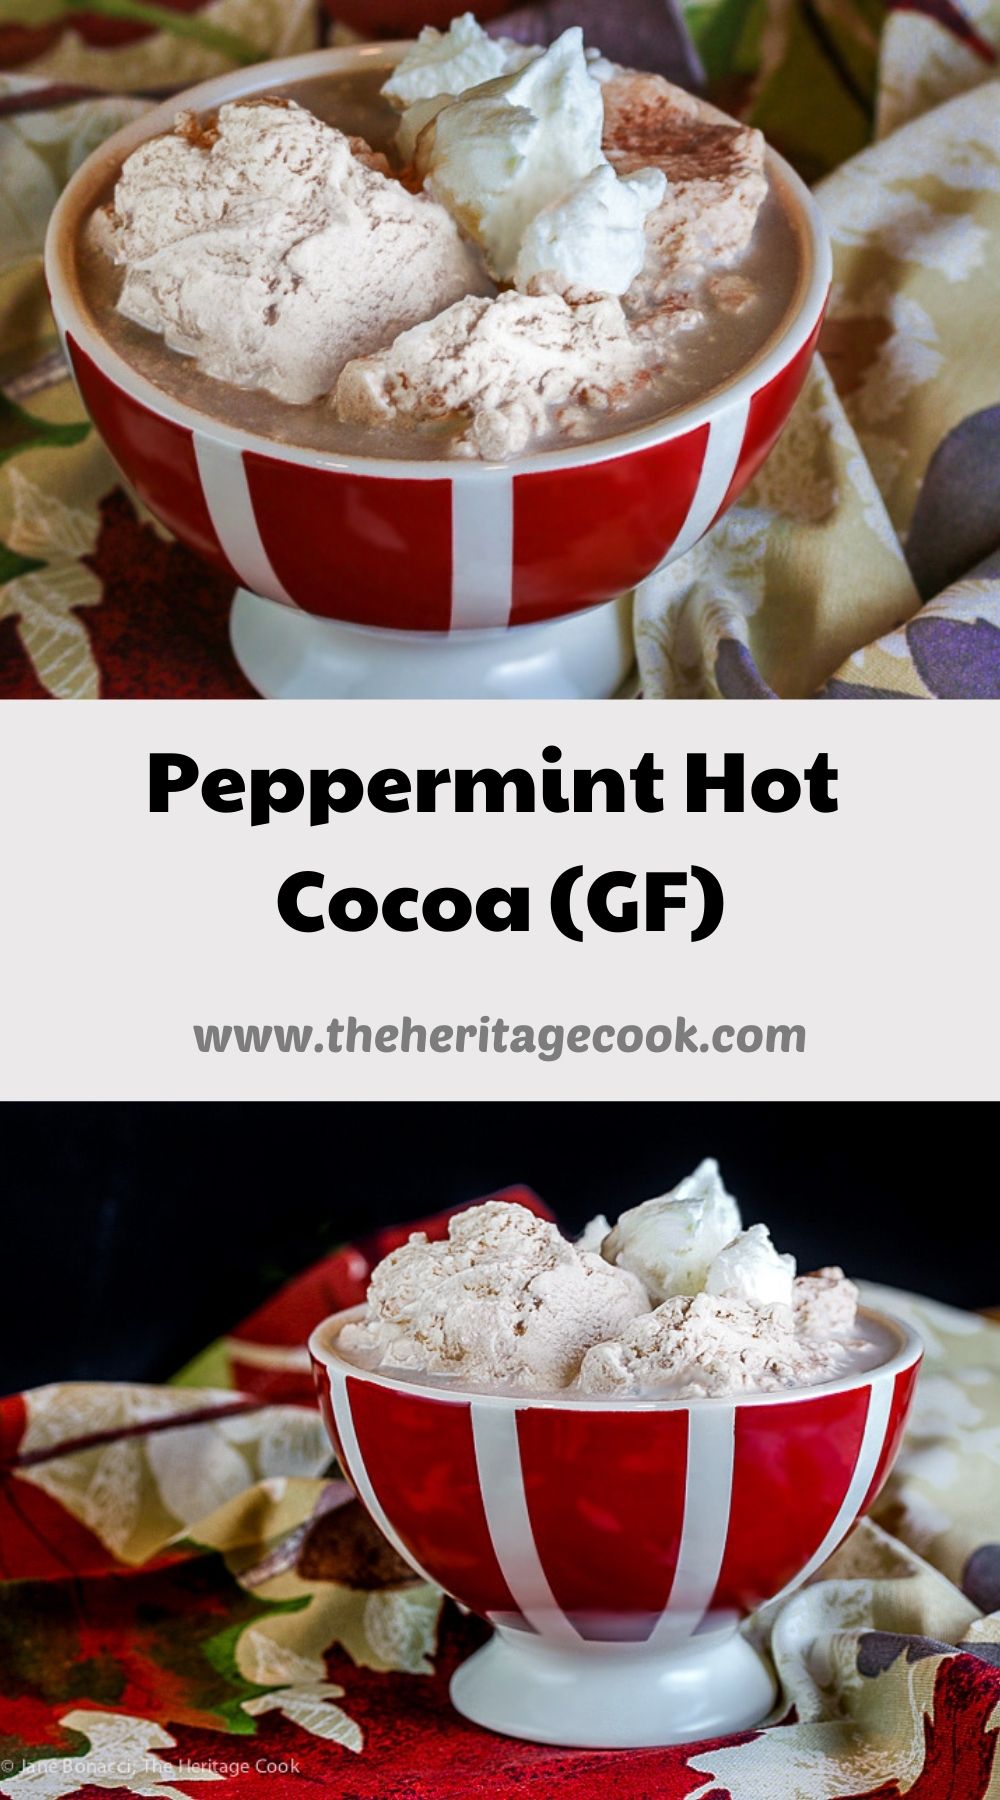 Peppermint Hot Cocoa with Fresh Whipped Cream; 2020 Jane Bonacci The Heritage Cook